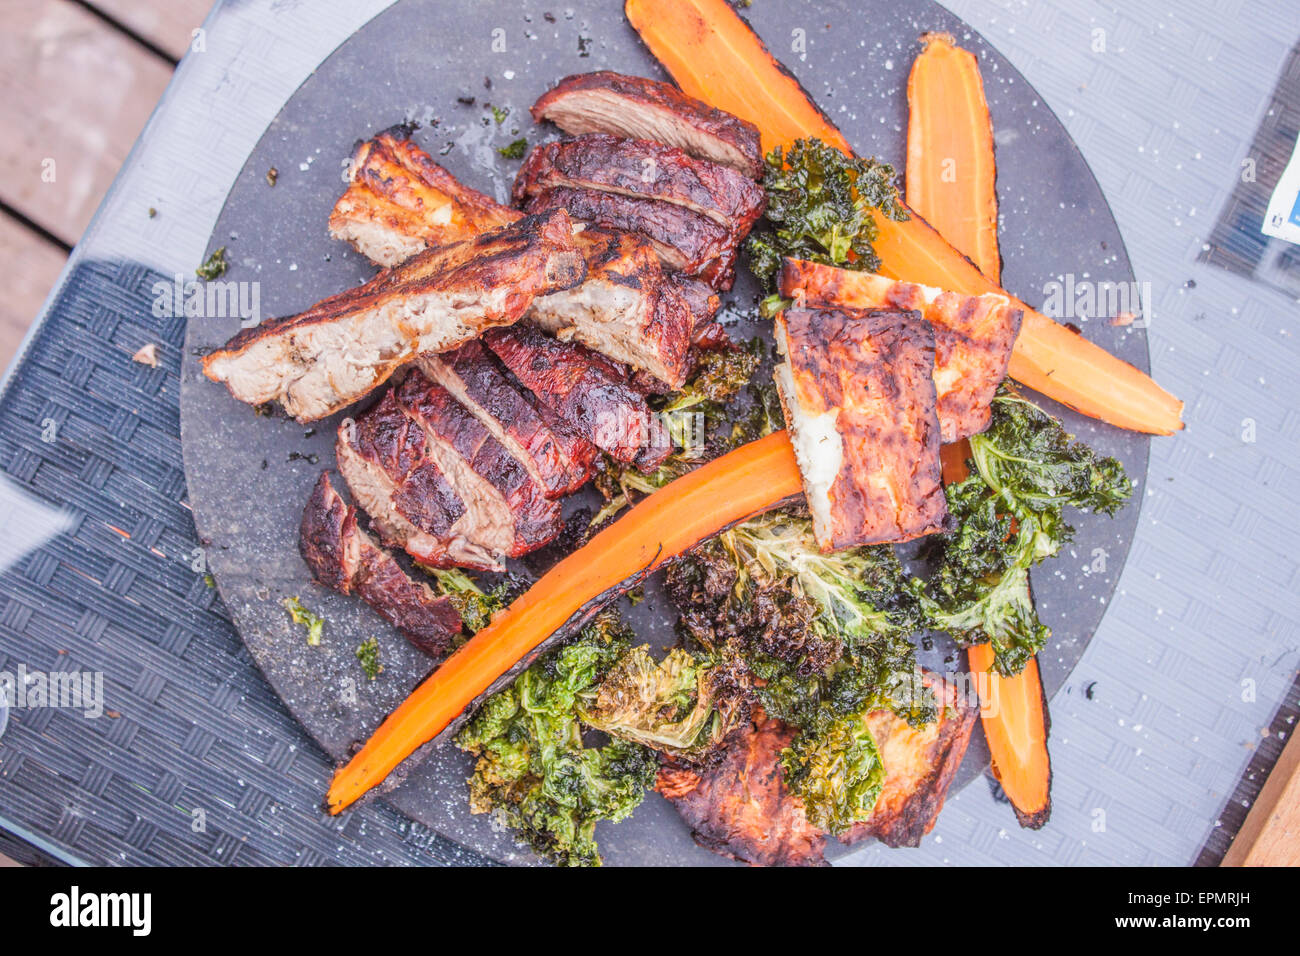 Grilled meat ,orange carrot and green kale Stock Photo